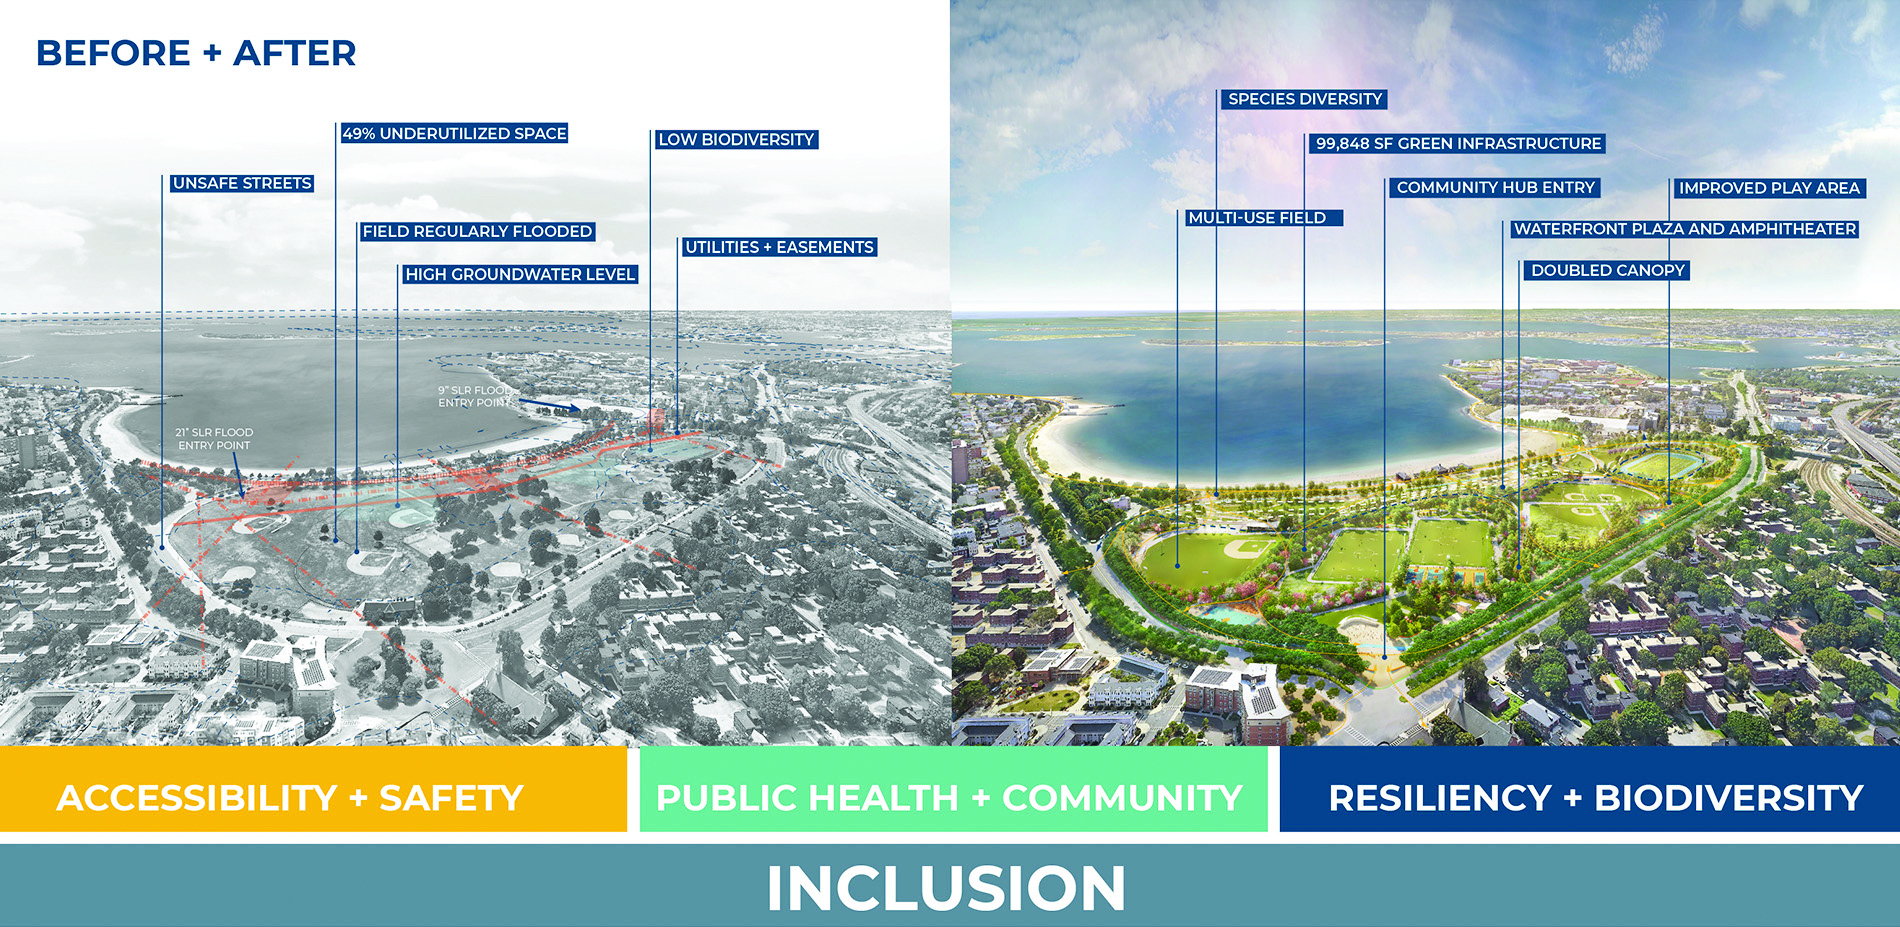 Before and After: Inclusion, Accessibility and Safety, Public Health and Community, Resiliency and Biodiversity